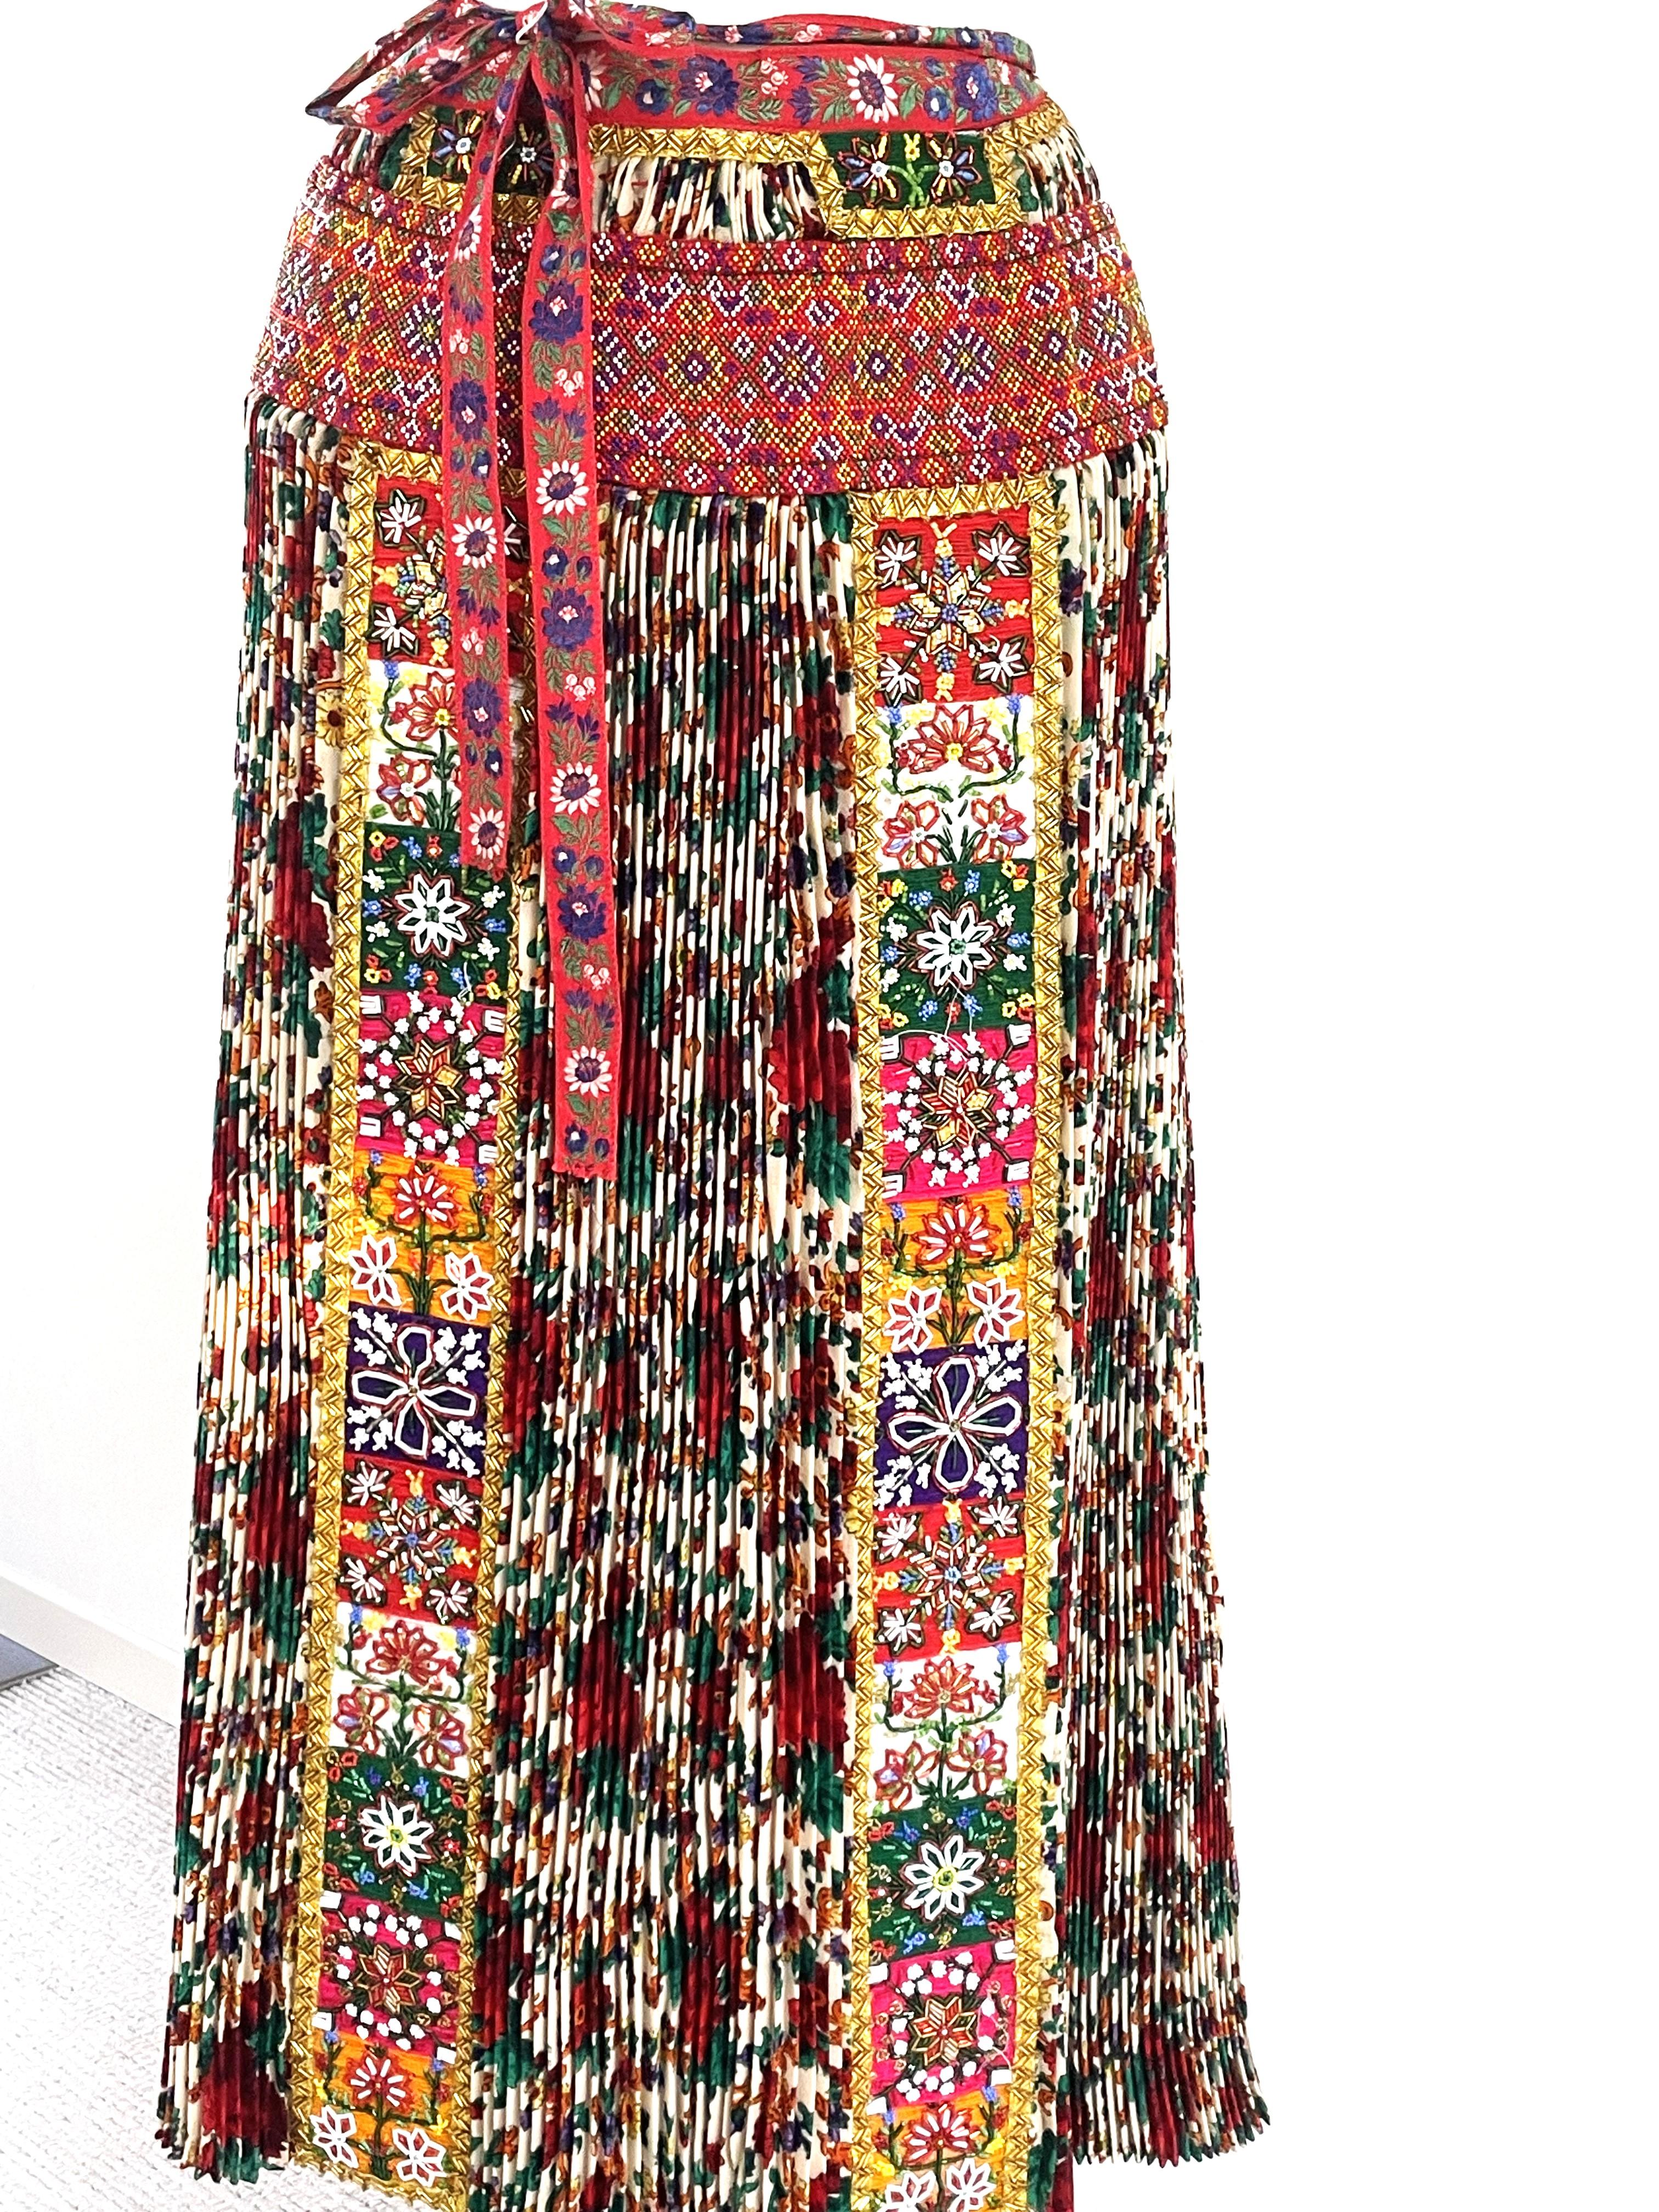  Hungarian traditional Shirt and Apron, embroiderd by hand with pealrs, 1940s For Sale 3